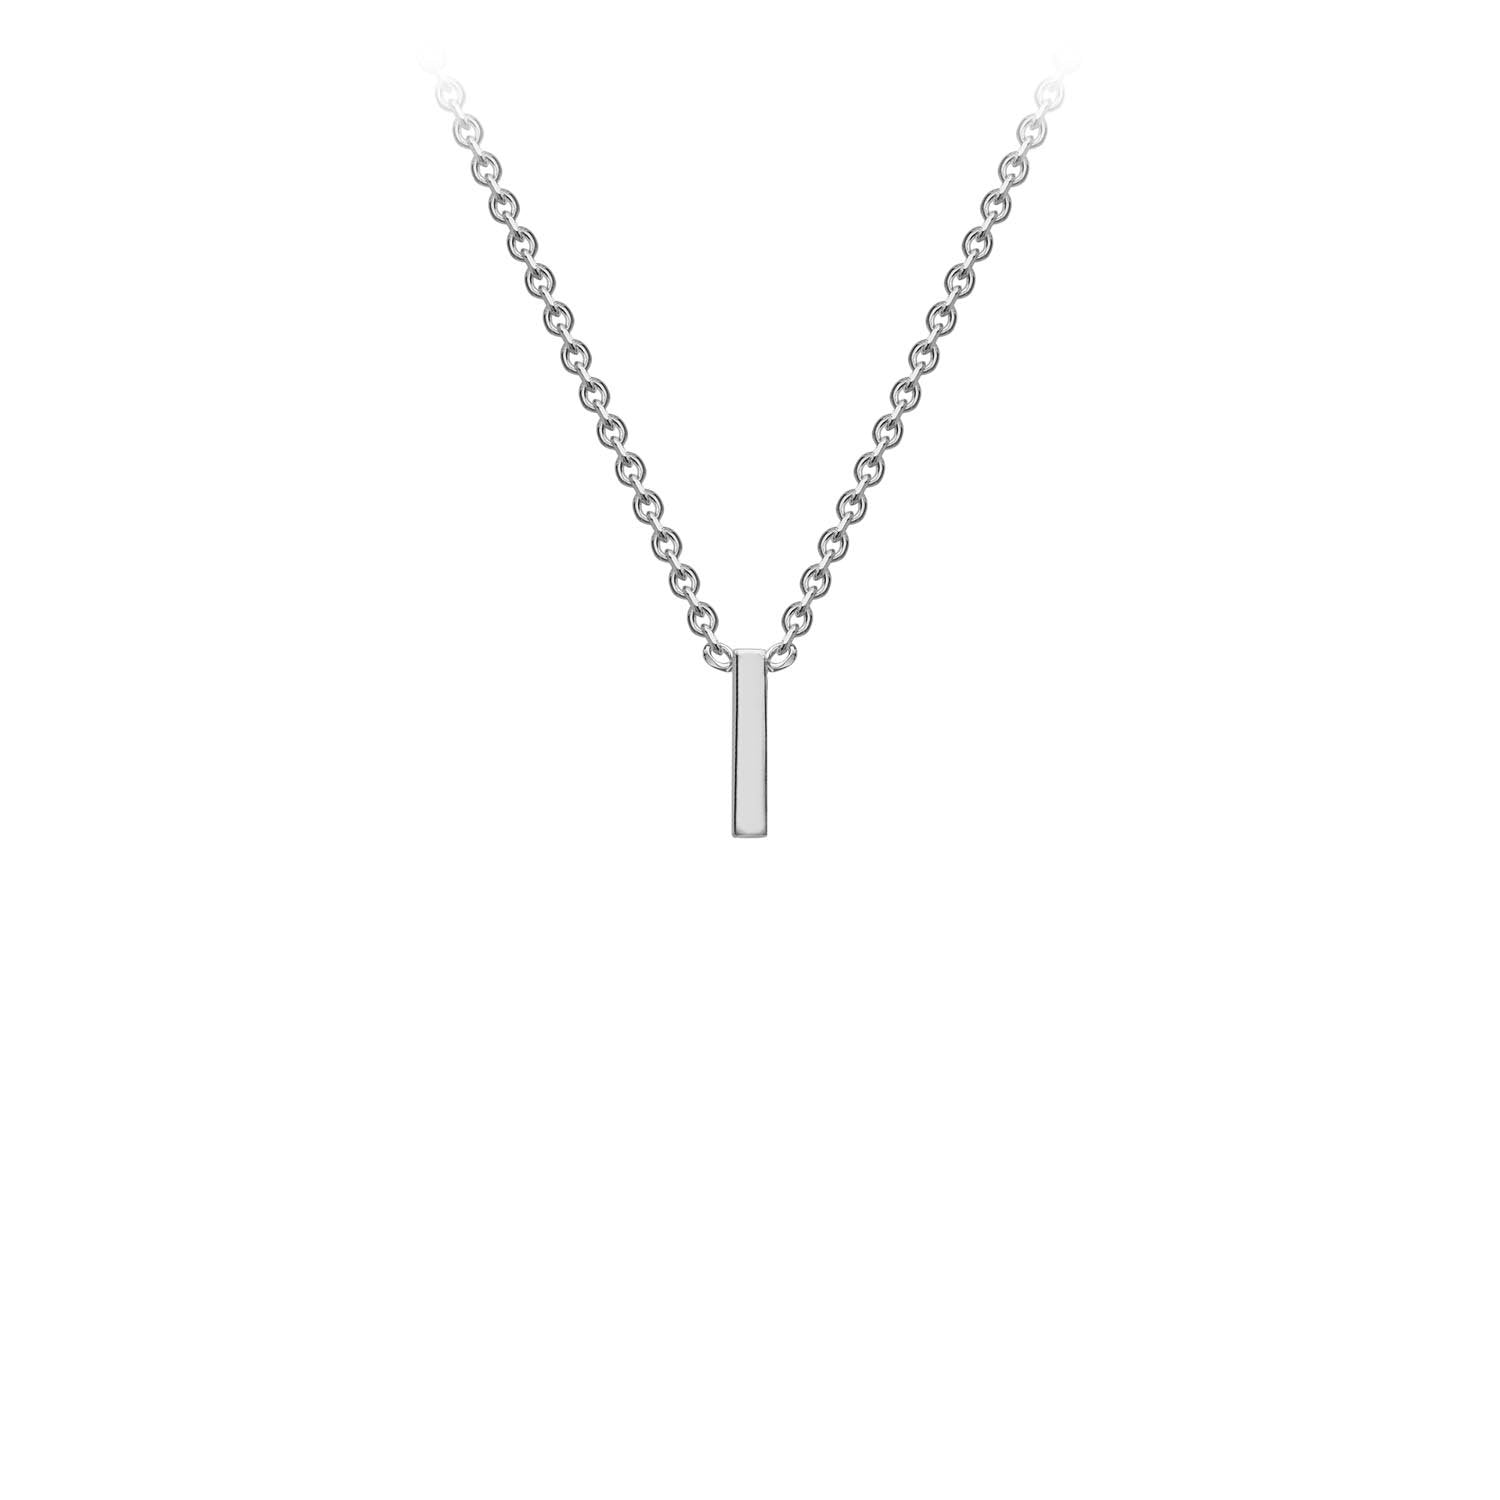 9ct White Gold 'I' Petite Initial Adjustable Letter Necklace 38/43cm